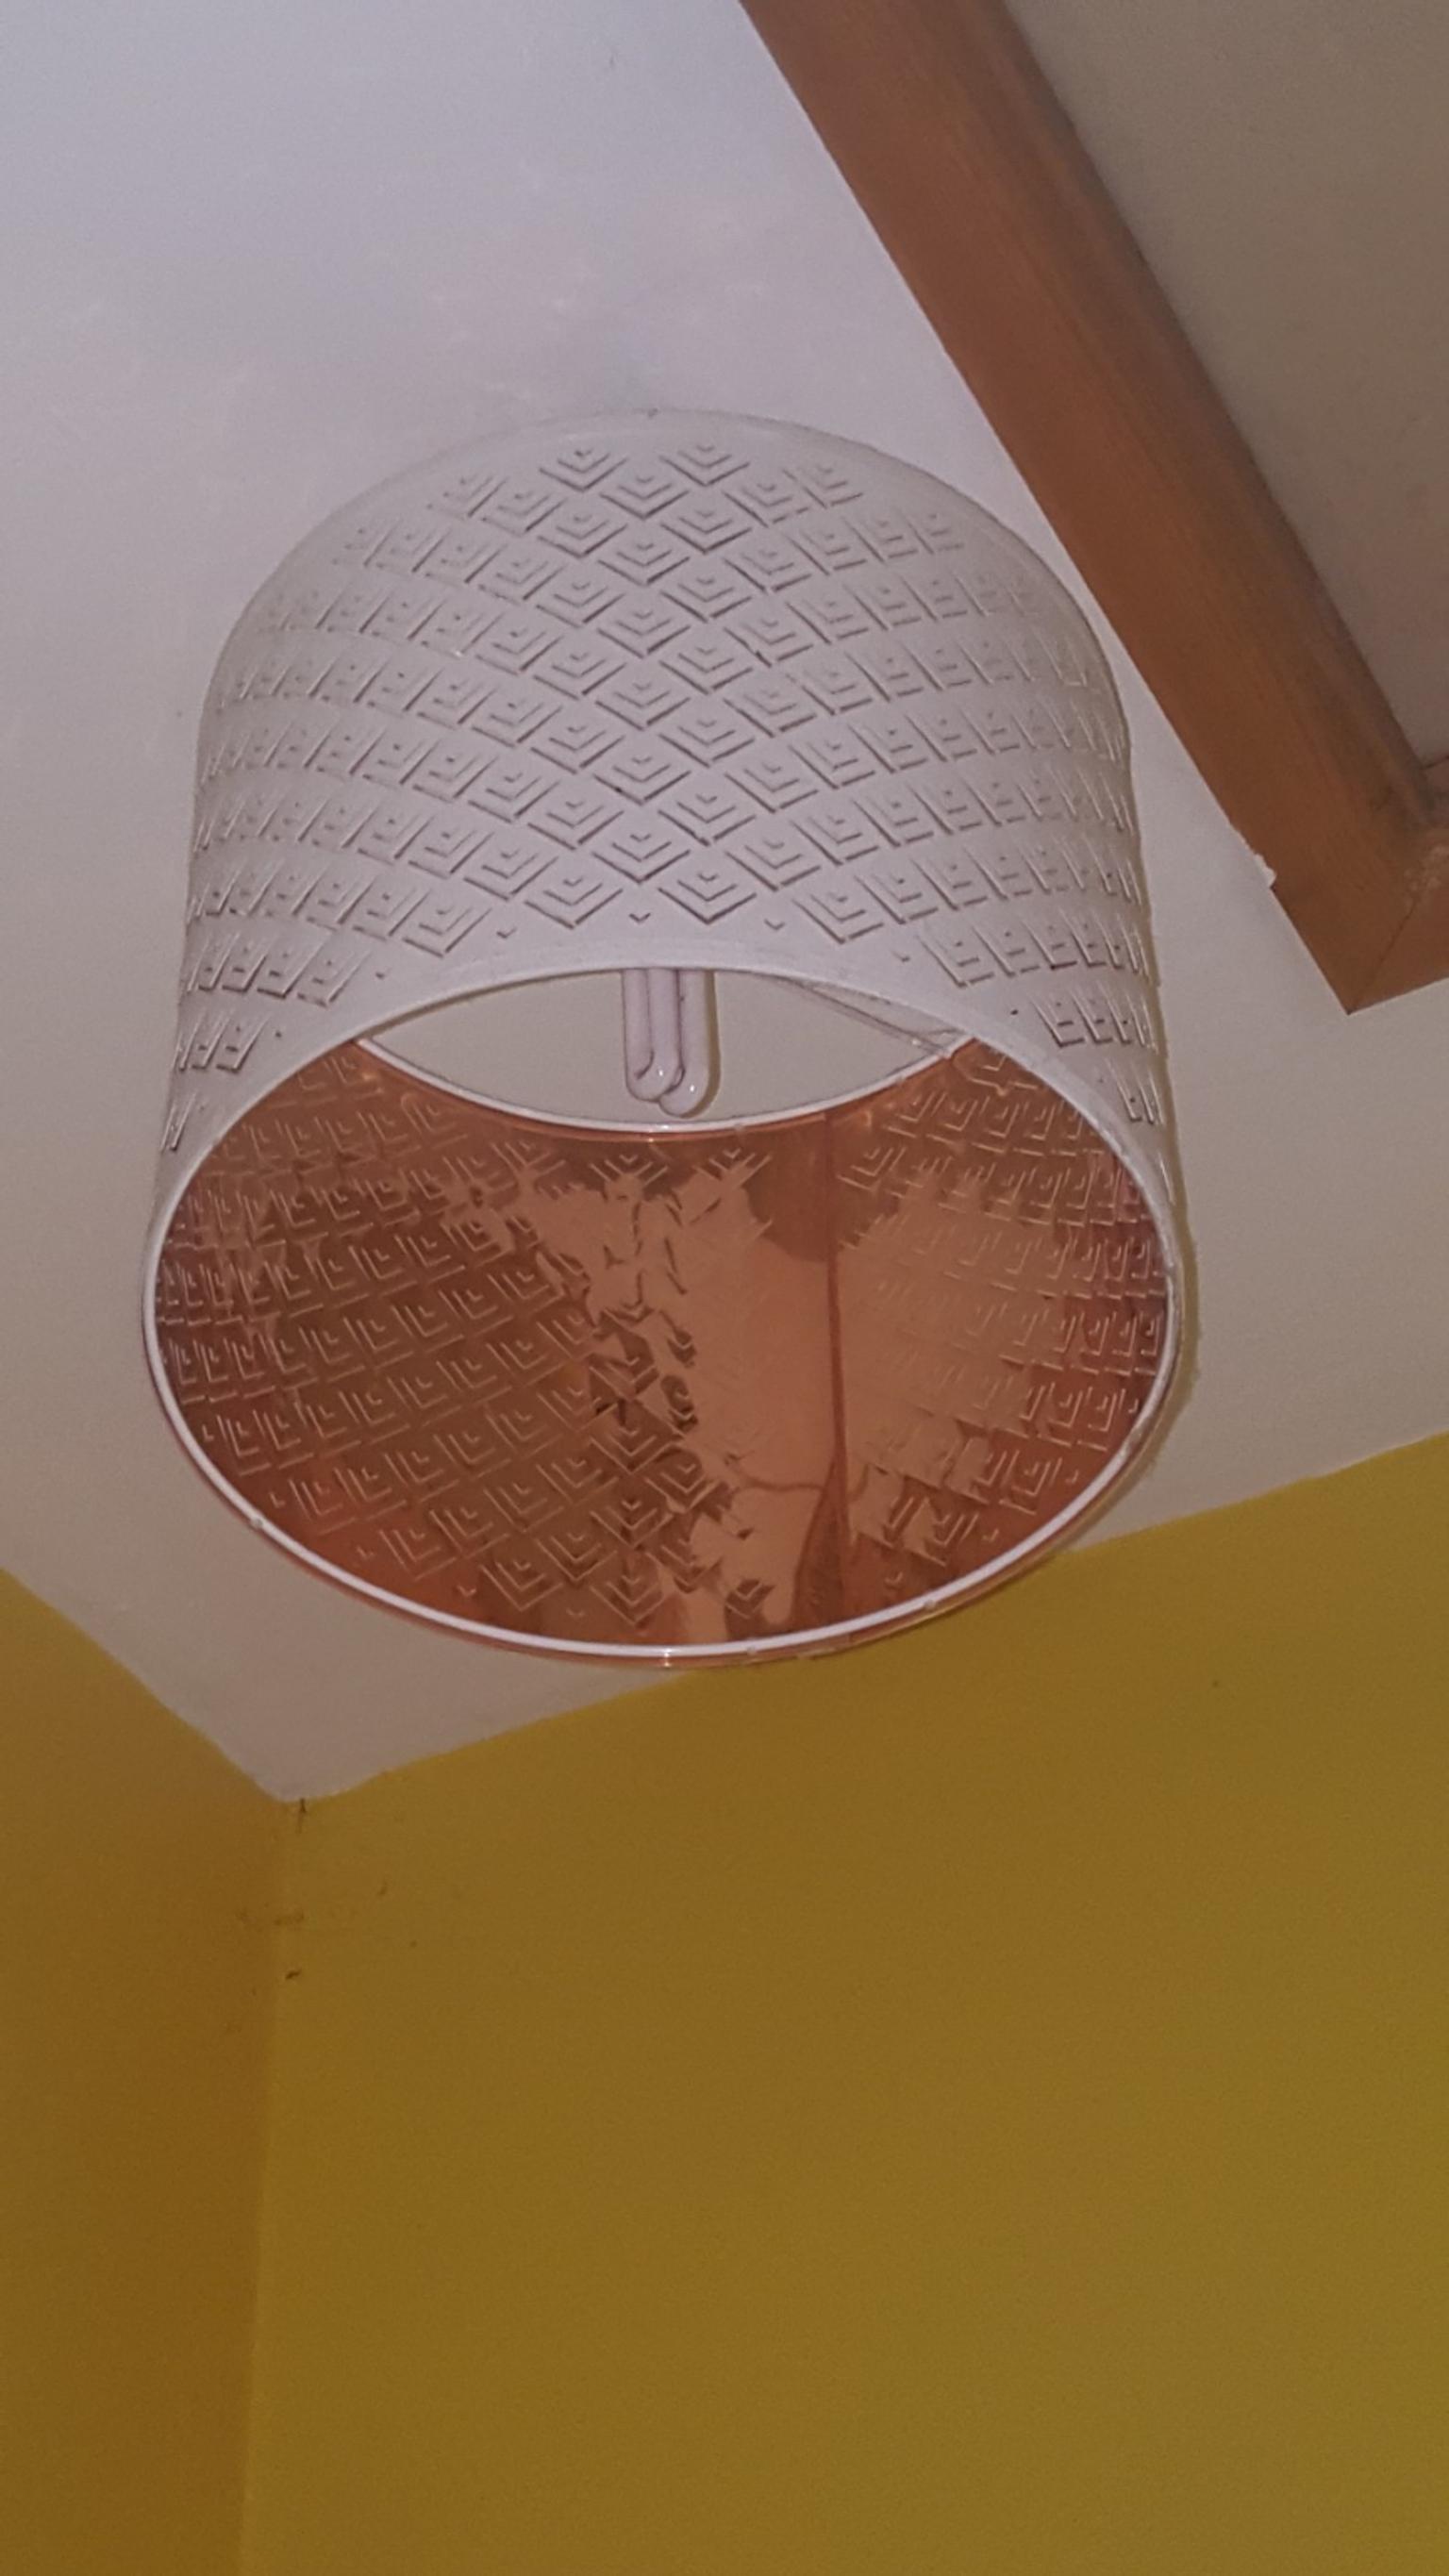 Ikea Lamp Shade In Kirklees For 5 00 For Sale Shpock